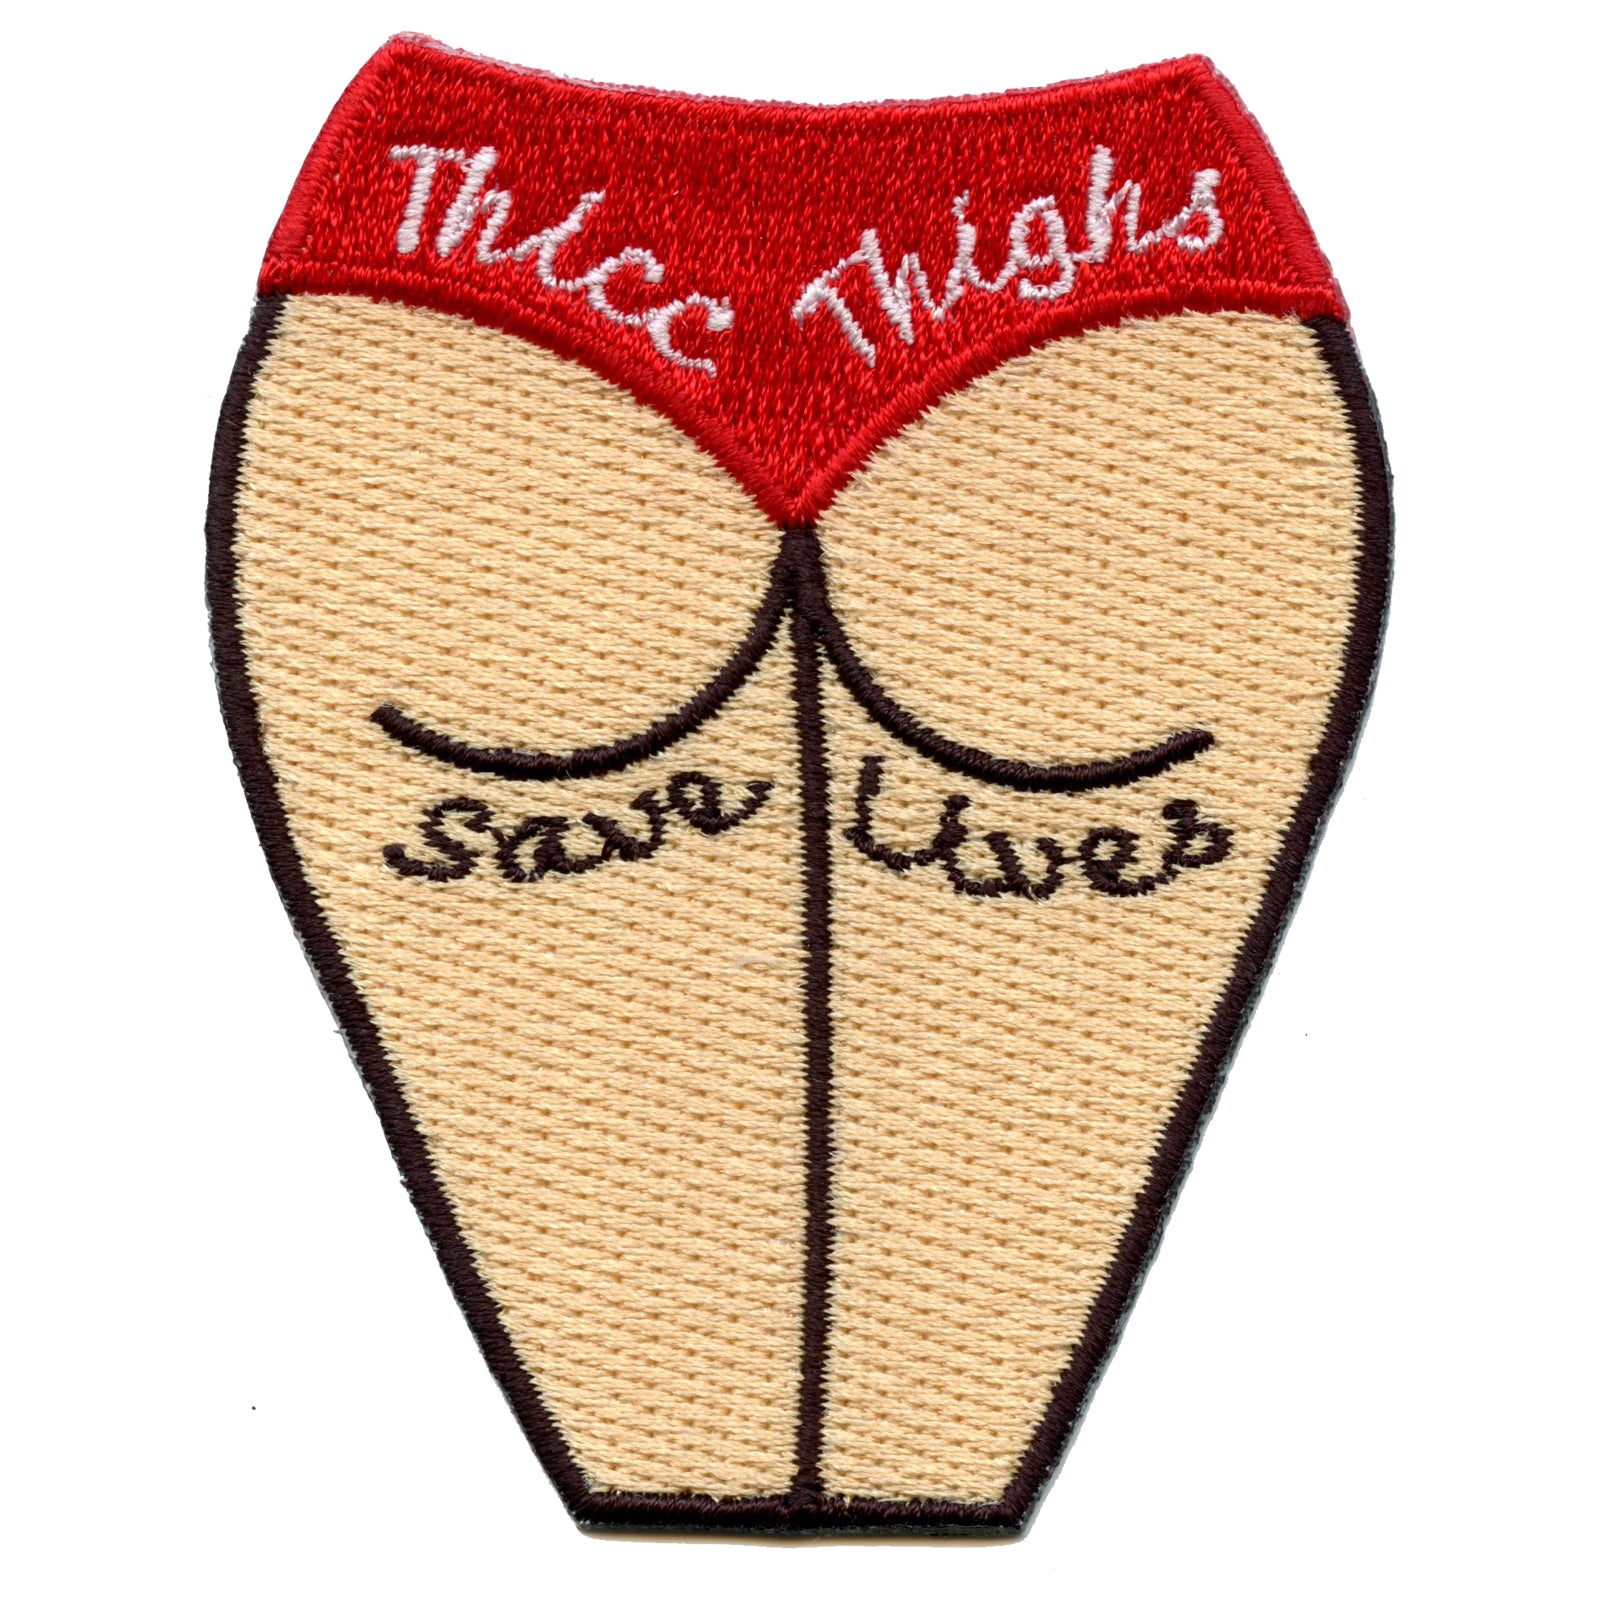 Add this Thicc Thighs embroidered patch to your growing